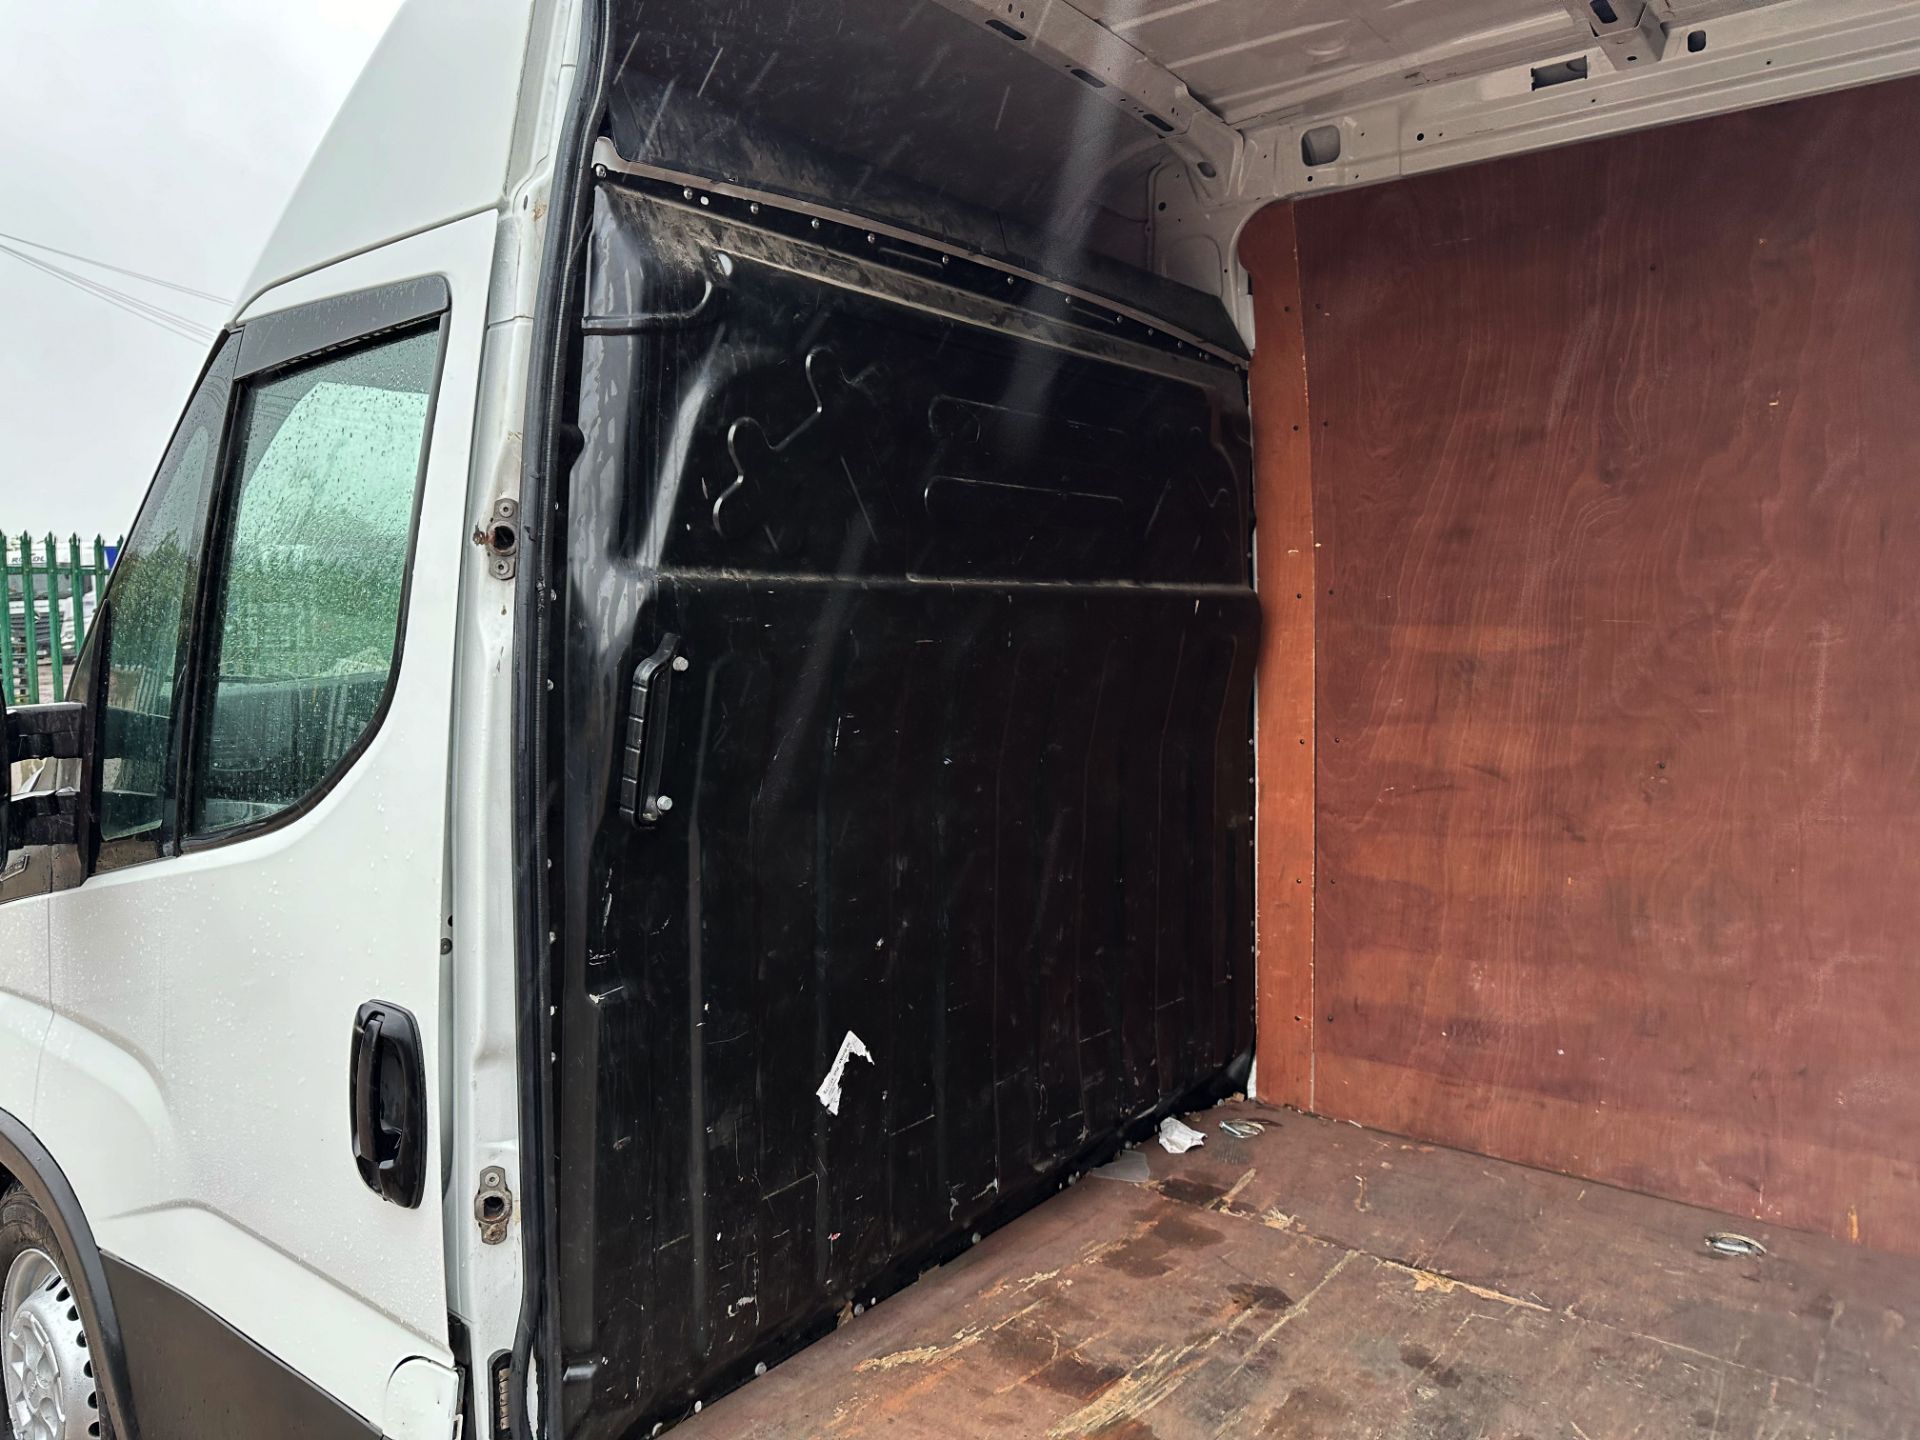 Iveco Daily 35-140 Long Wheel Base High Roof - 2021 Reg (New Shape) Only 85K Miles - Air Con - Look! - Image 13 of 27